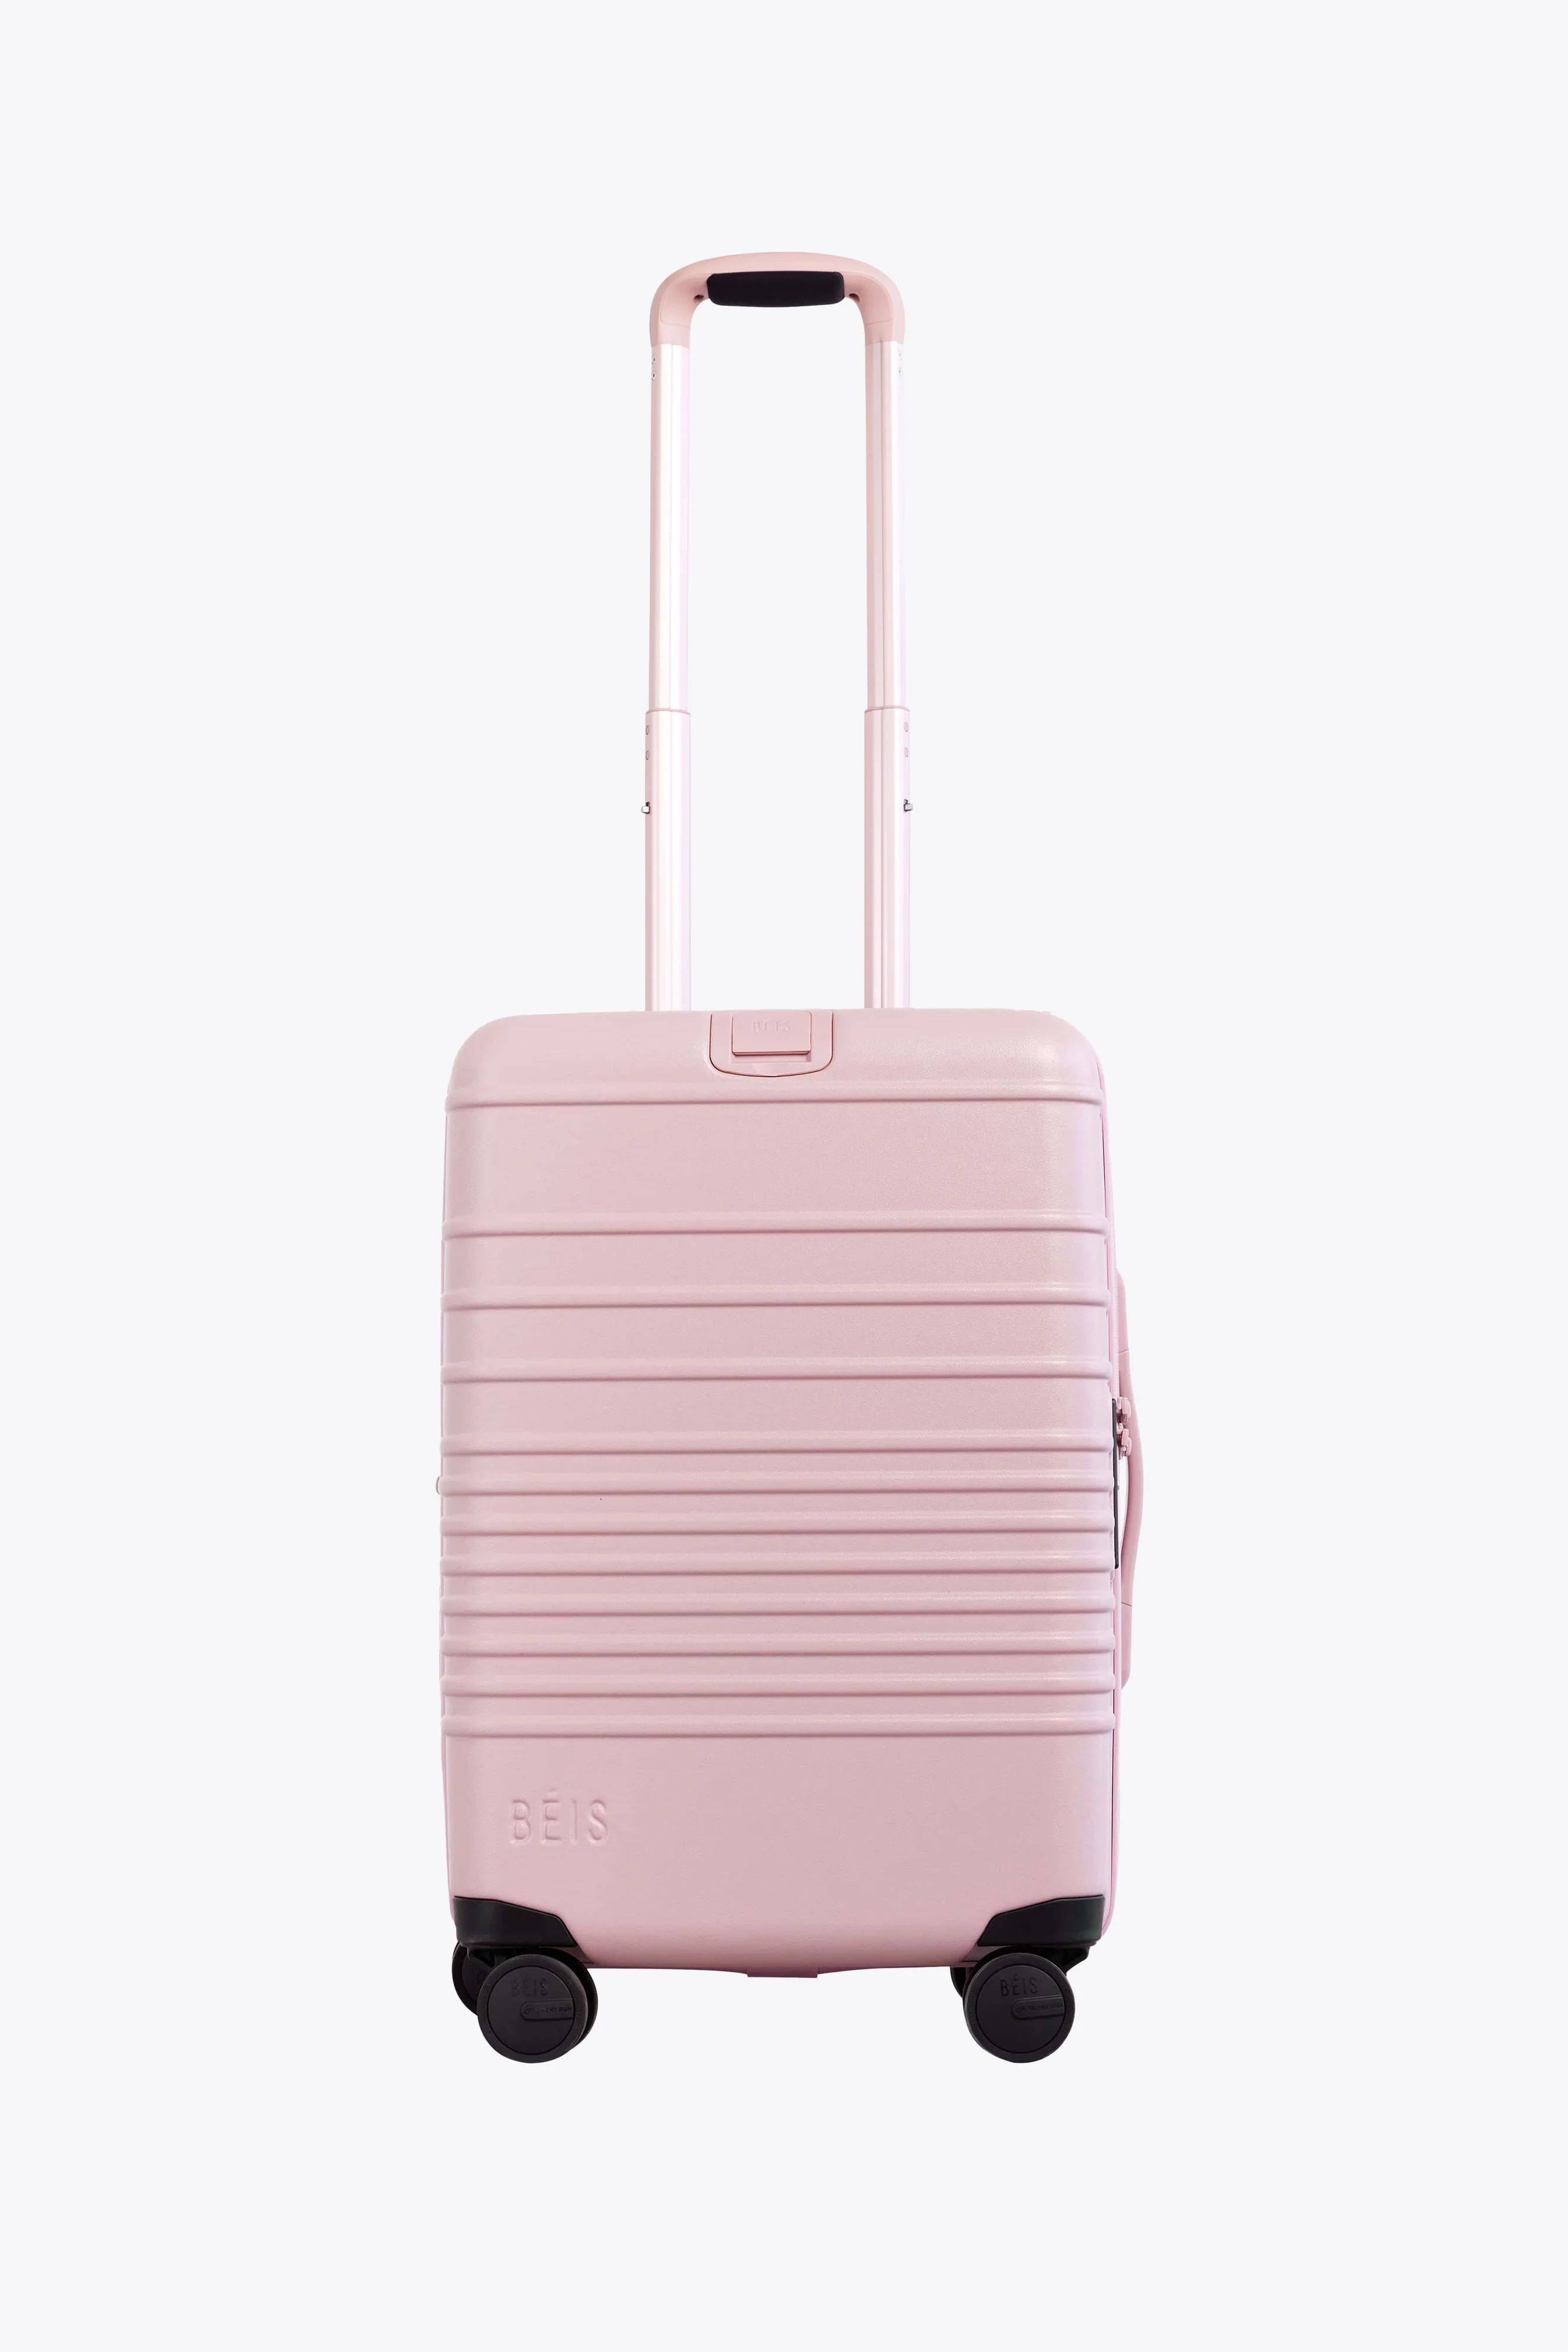 The Carry-On Roller in Atlas Pink | BÉIS Travel